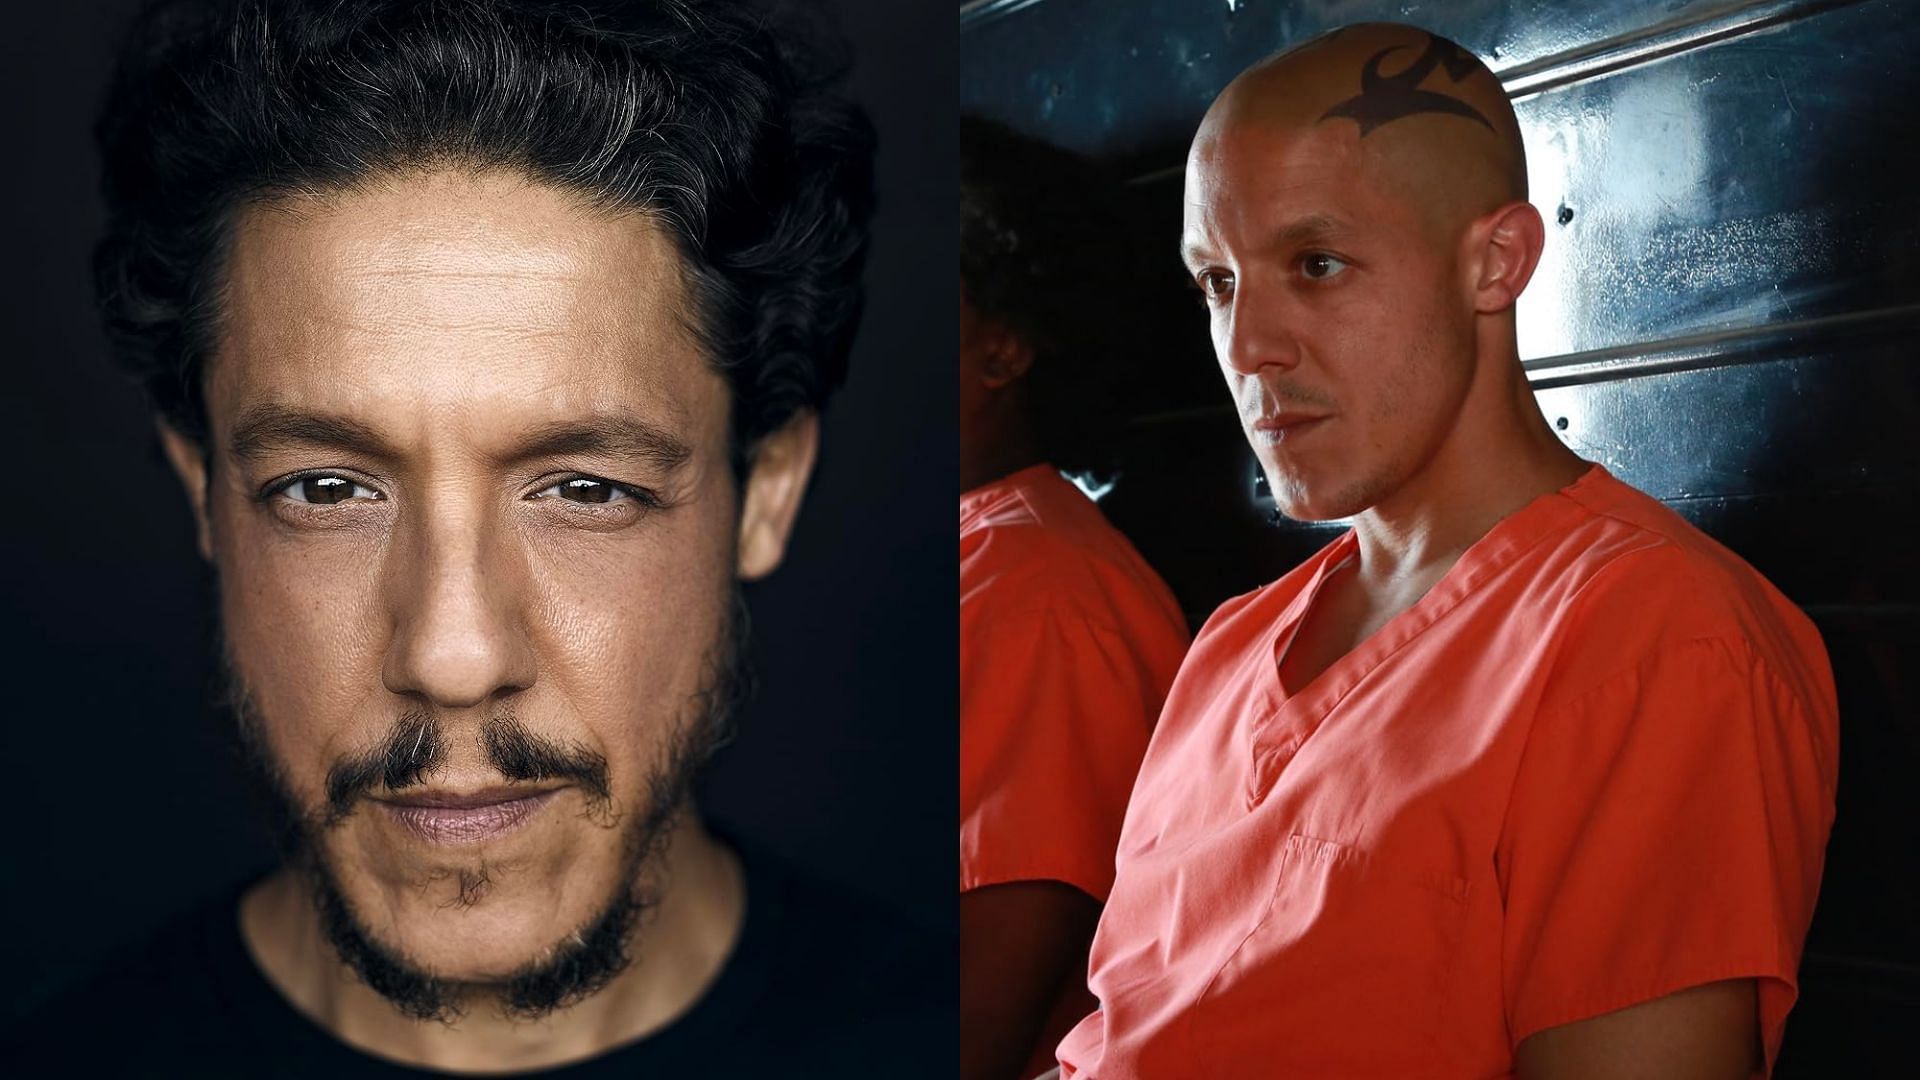 Theo Rossi plays the role of Ramos (Images via IMDb)